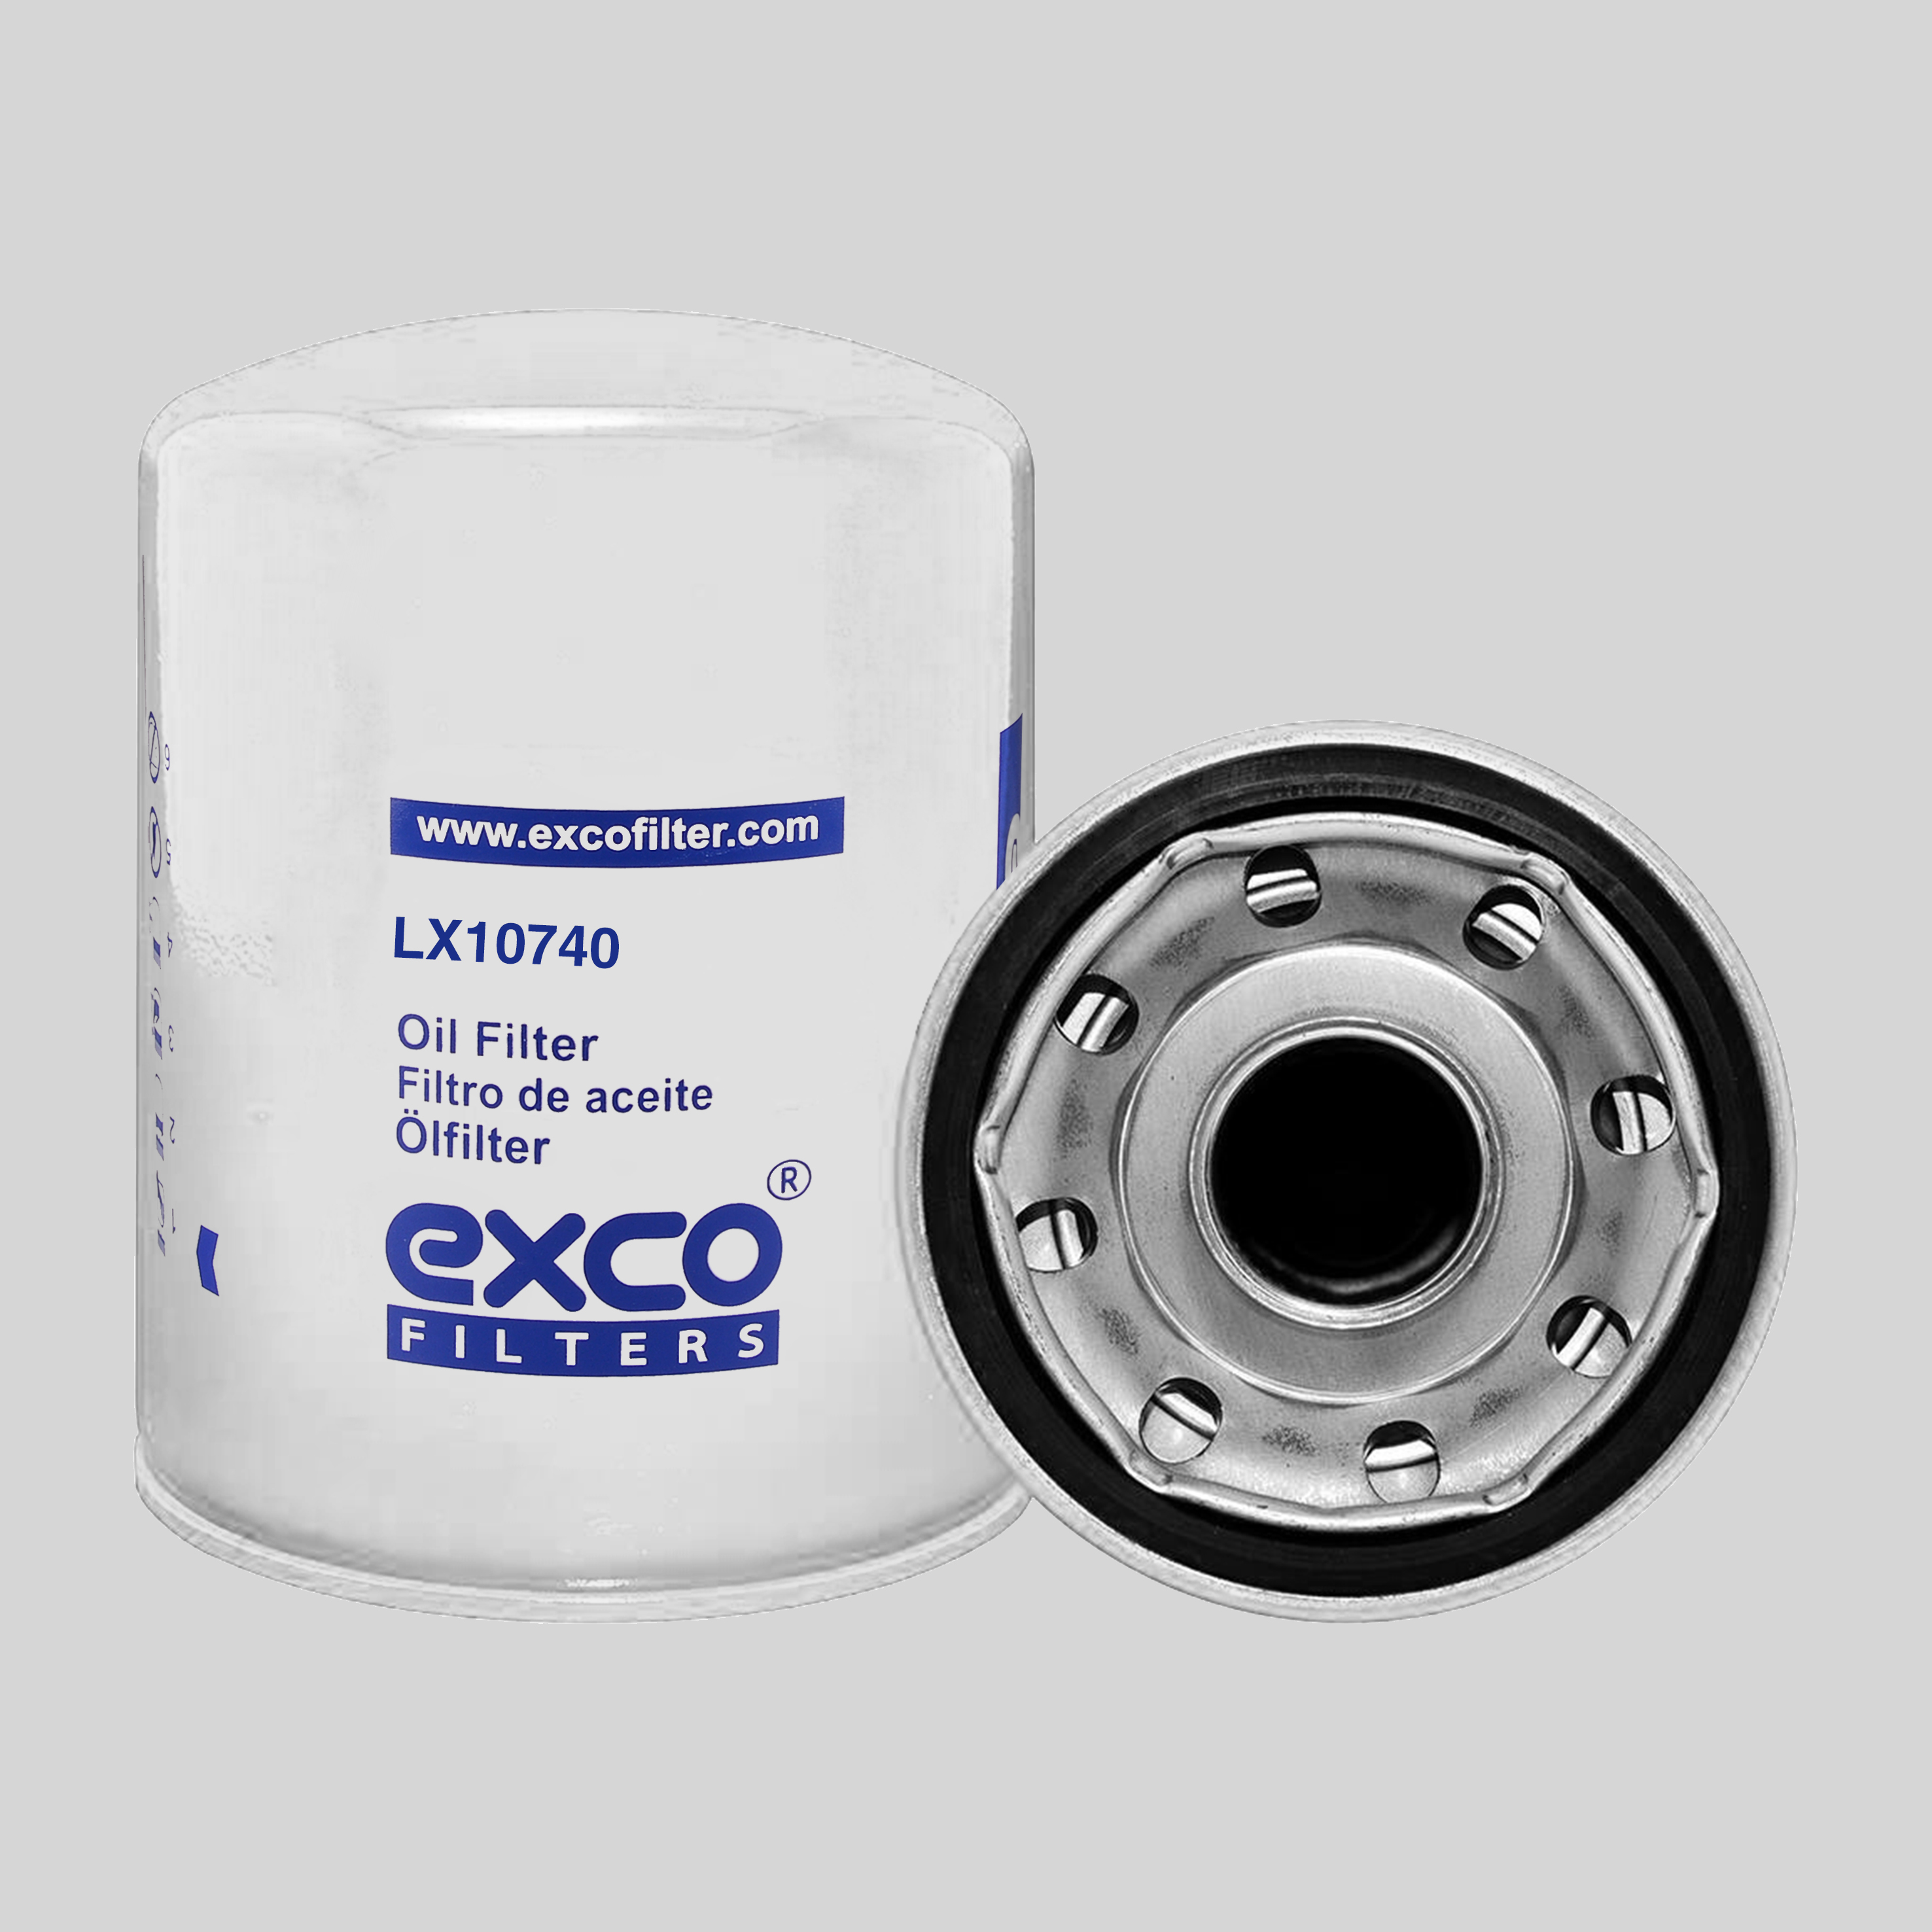 
                        
                                                                                                                KRALINATOR L212 - oil filter cross reference - excofilter
                                                                                    
                            